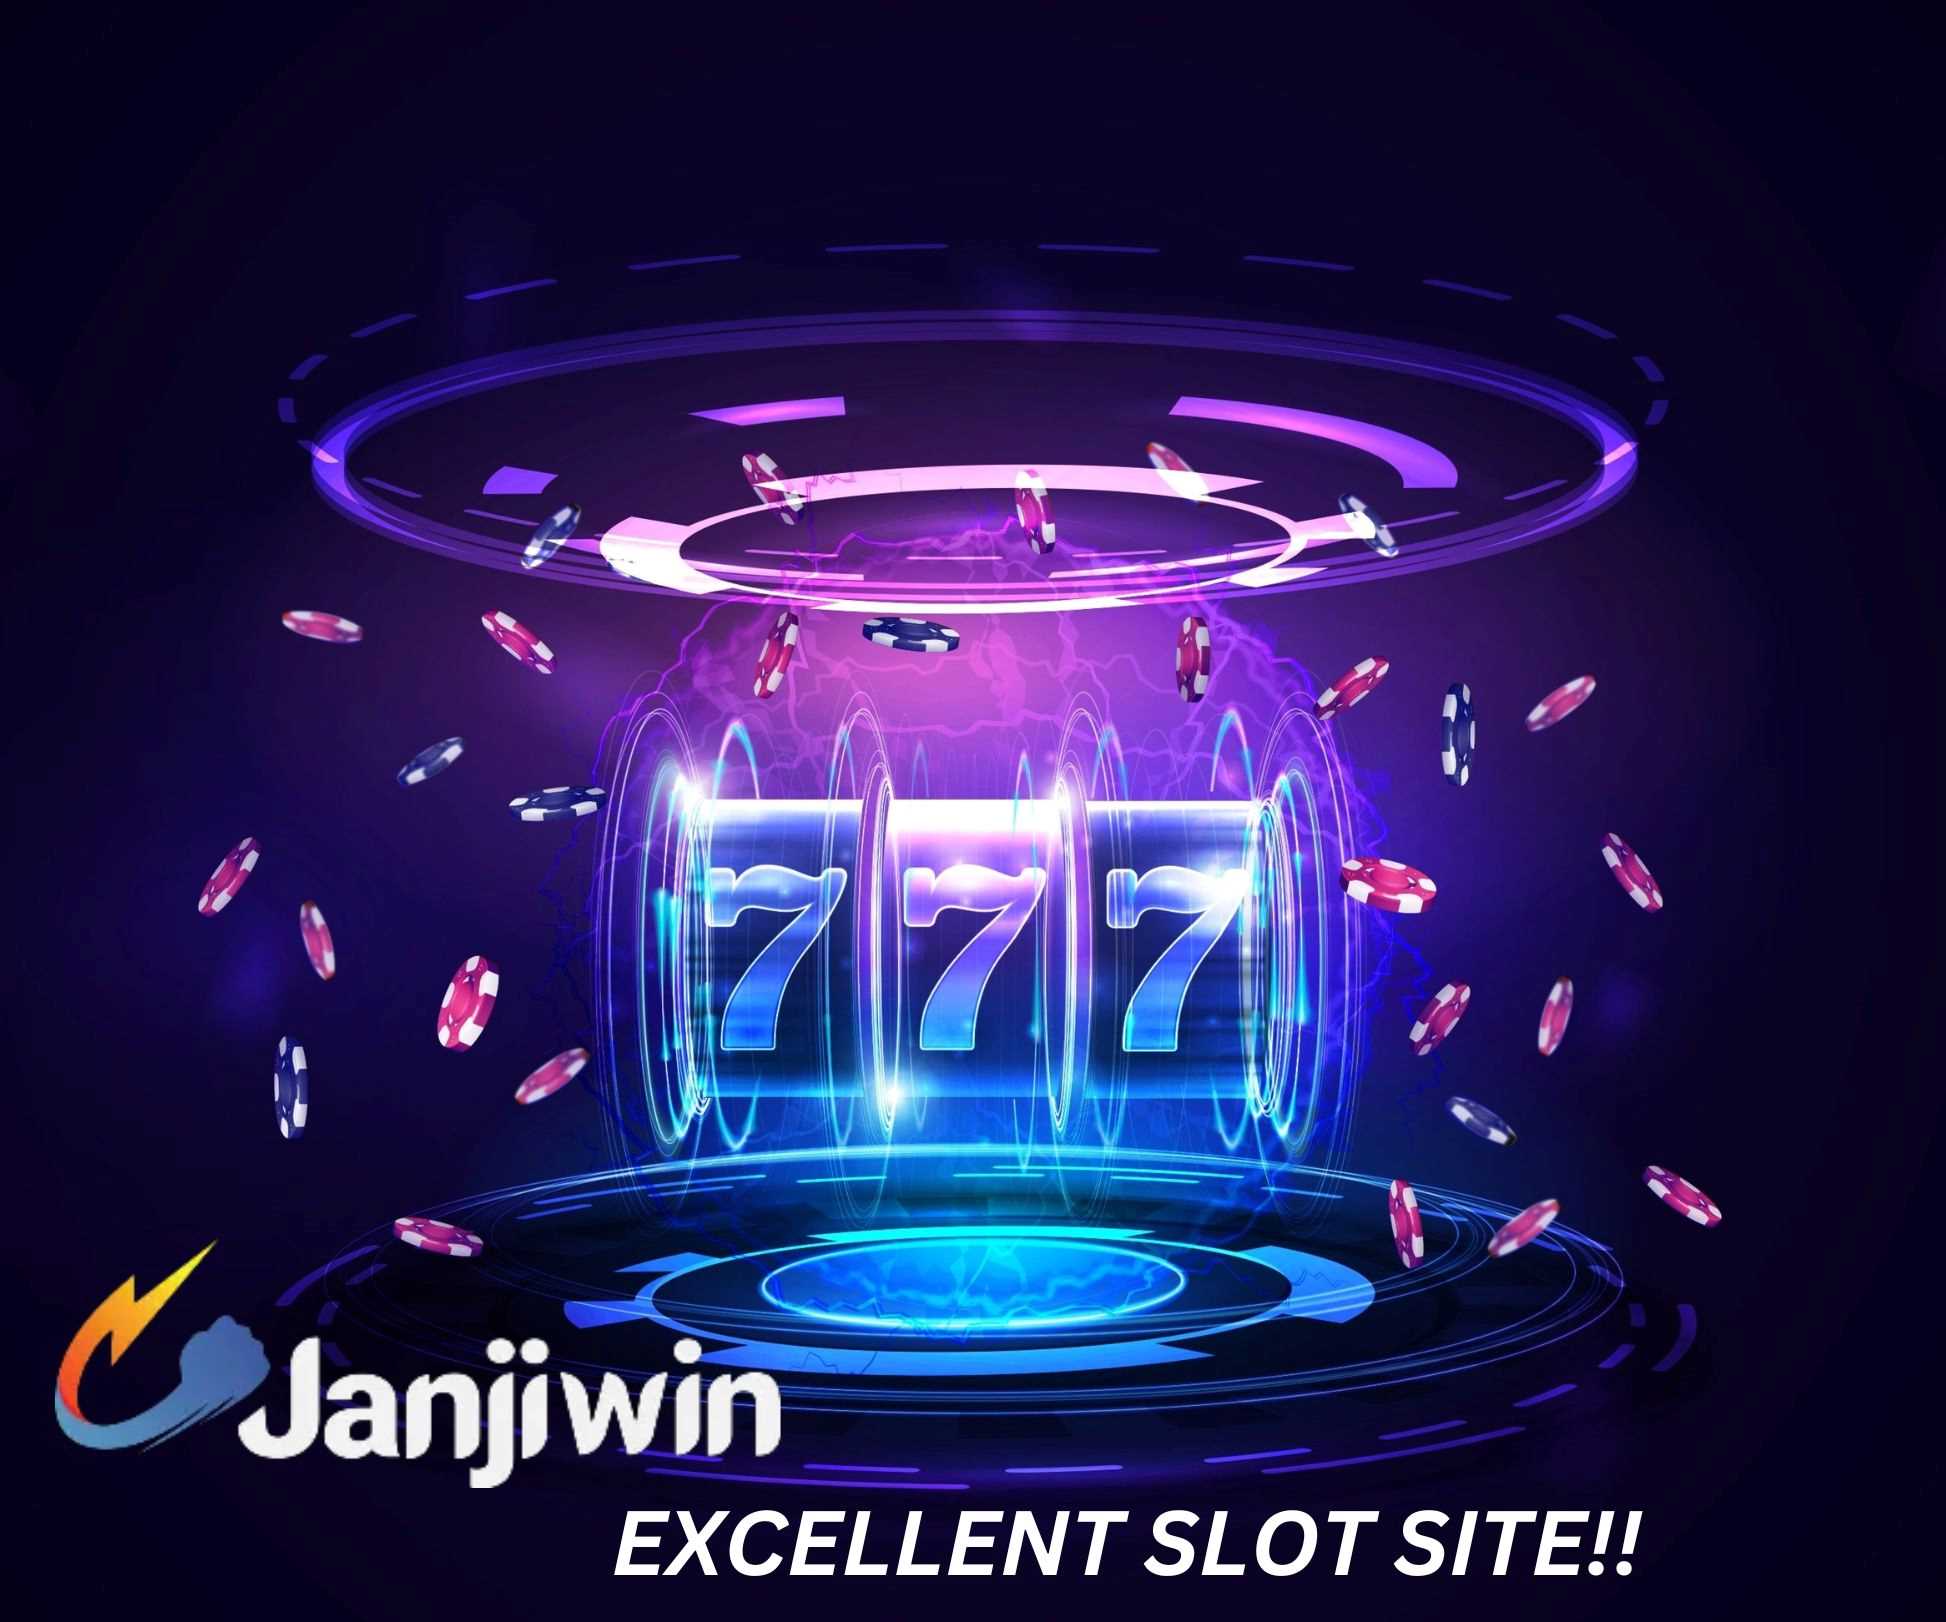 The best slot playing site is only on janjiwin